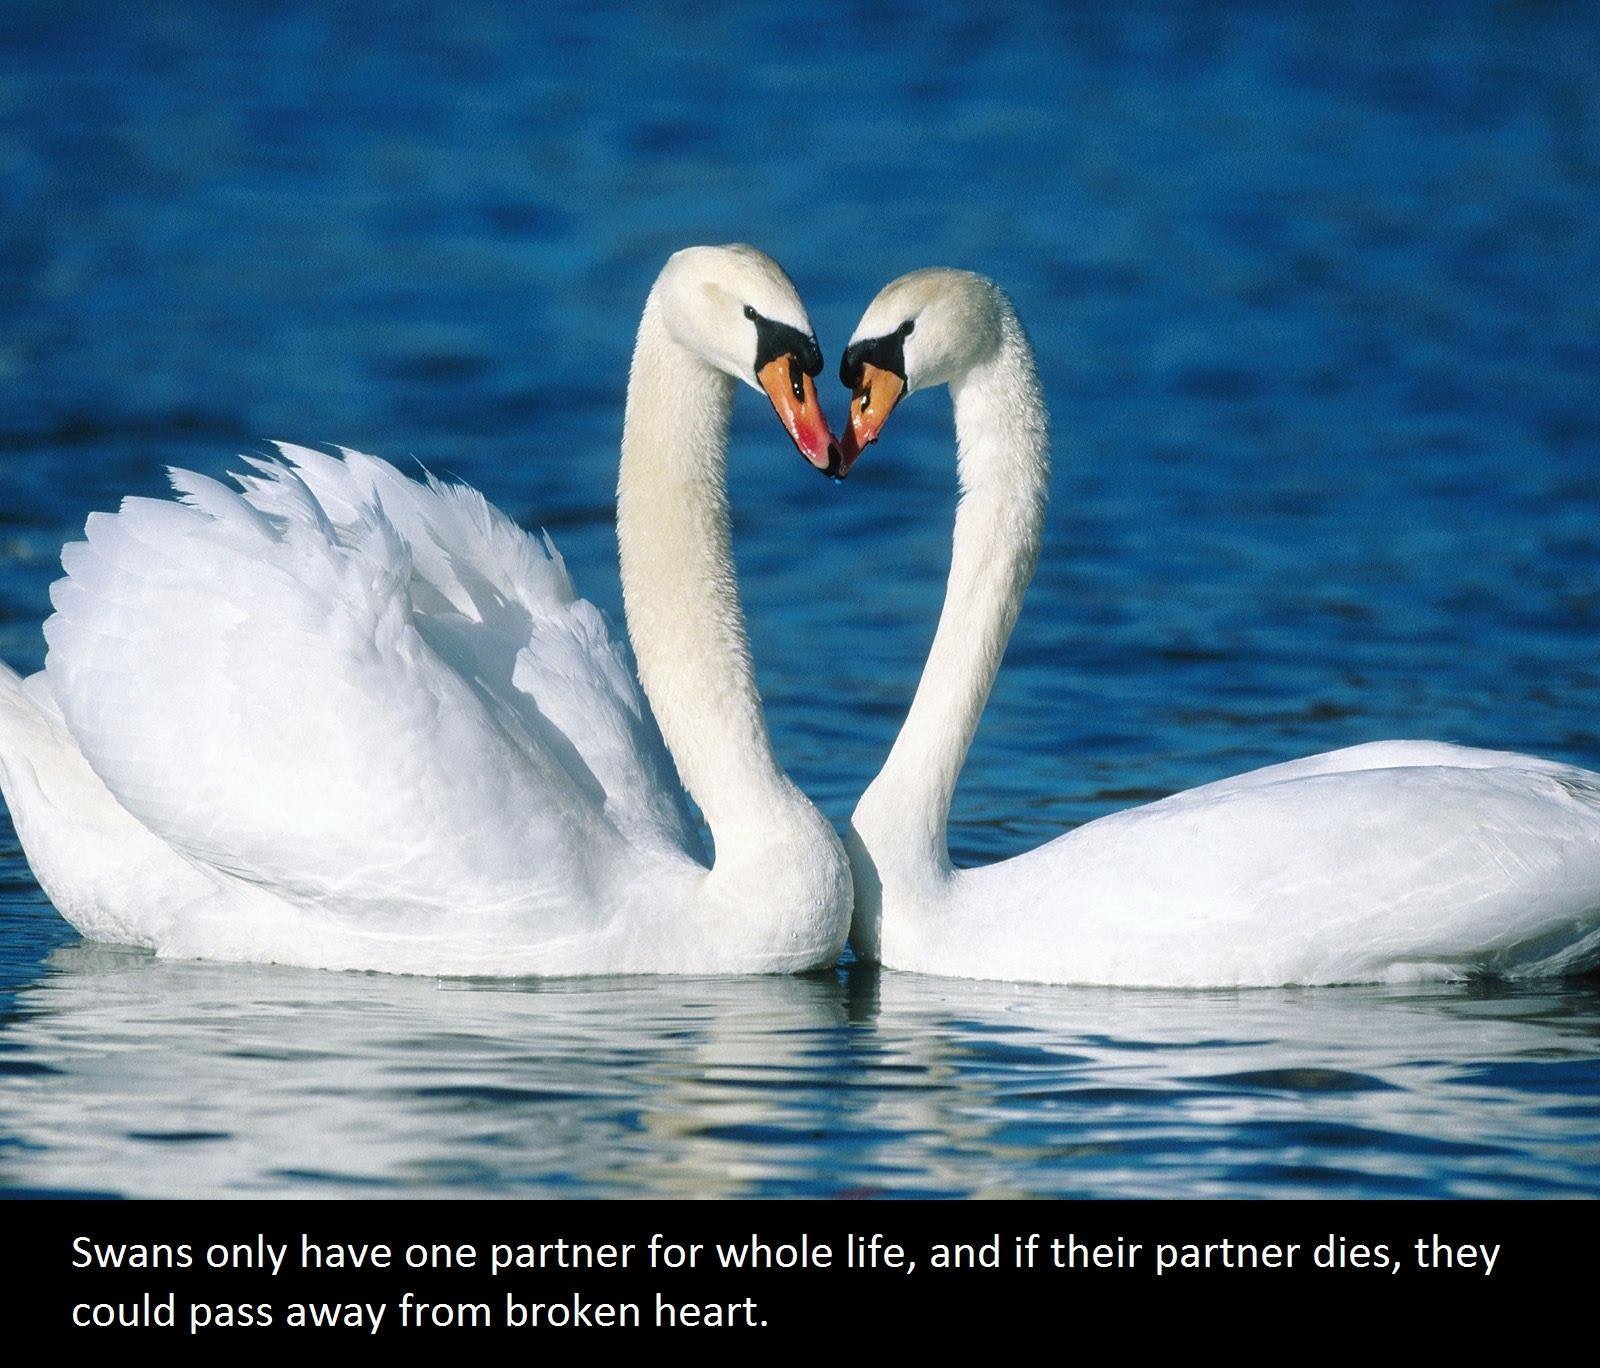 swan love meme - Swans only have one partner for whole life, and if their partner dies, they could pass away from broken heart.